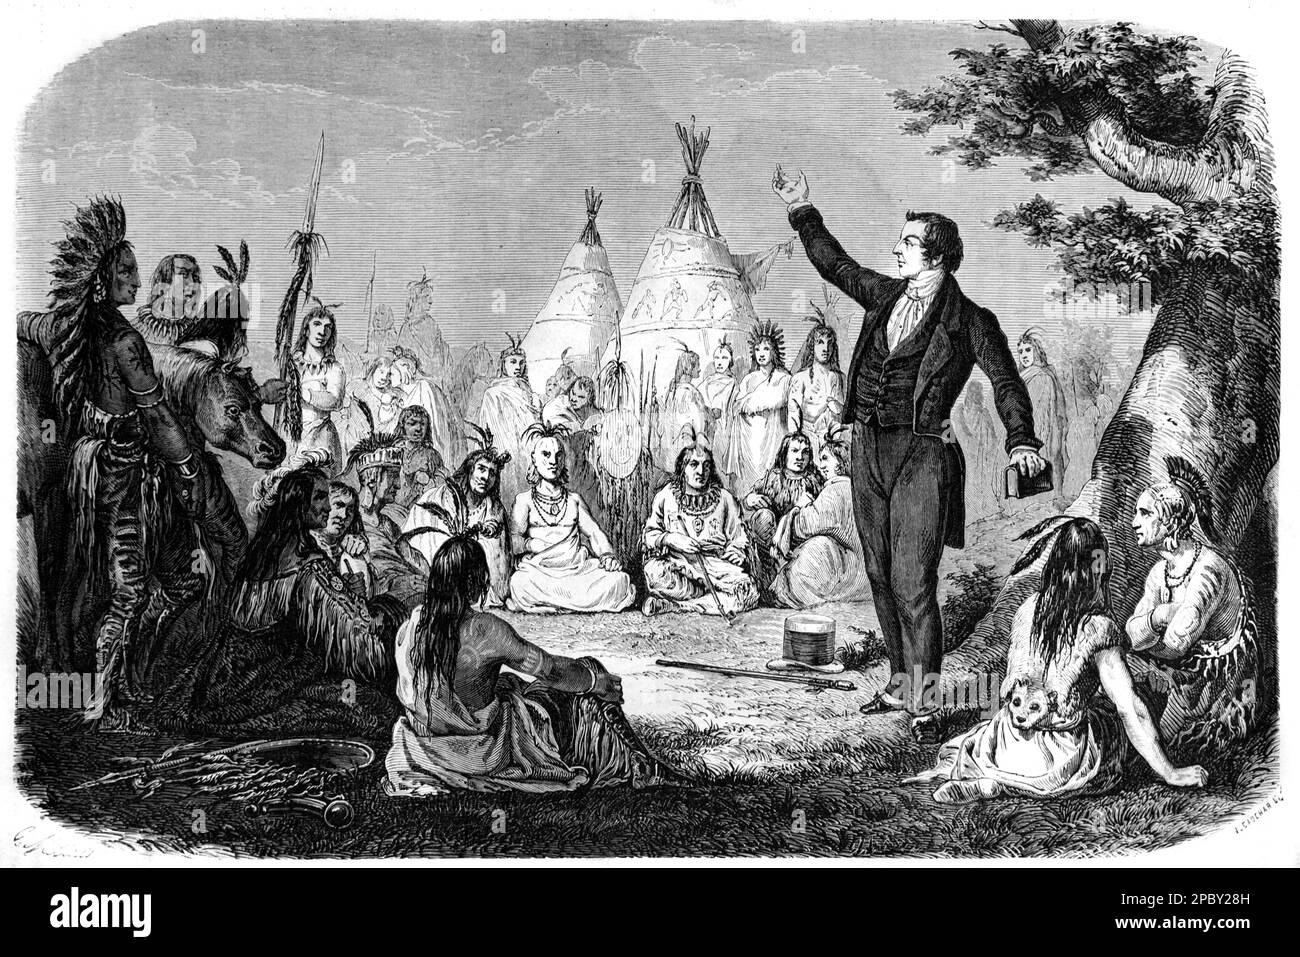 Portrait of Joseph Smith (1805-1844) Founder & First President (1830-1844) of the Church of Jesus Christ Later-day Saints, Mormonism or LDC Movement Preaching to Native Americans, Indians, Amerindians, Indigenous People or Ethnic Group. Vintage or Historic Engraving or Illustration 1862 Stock Photo